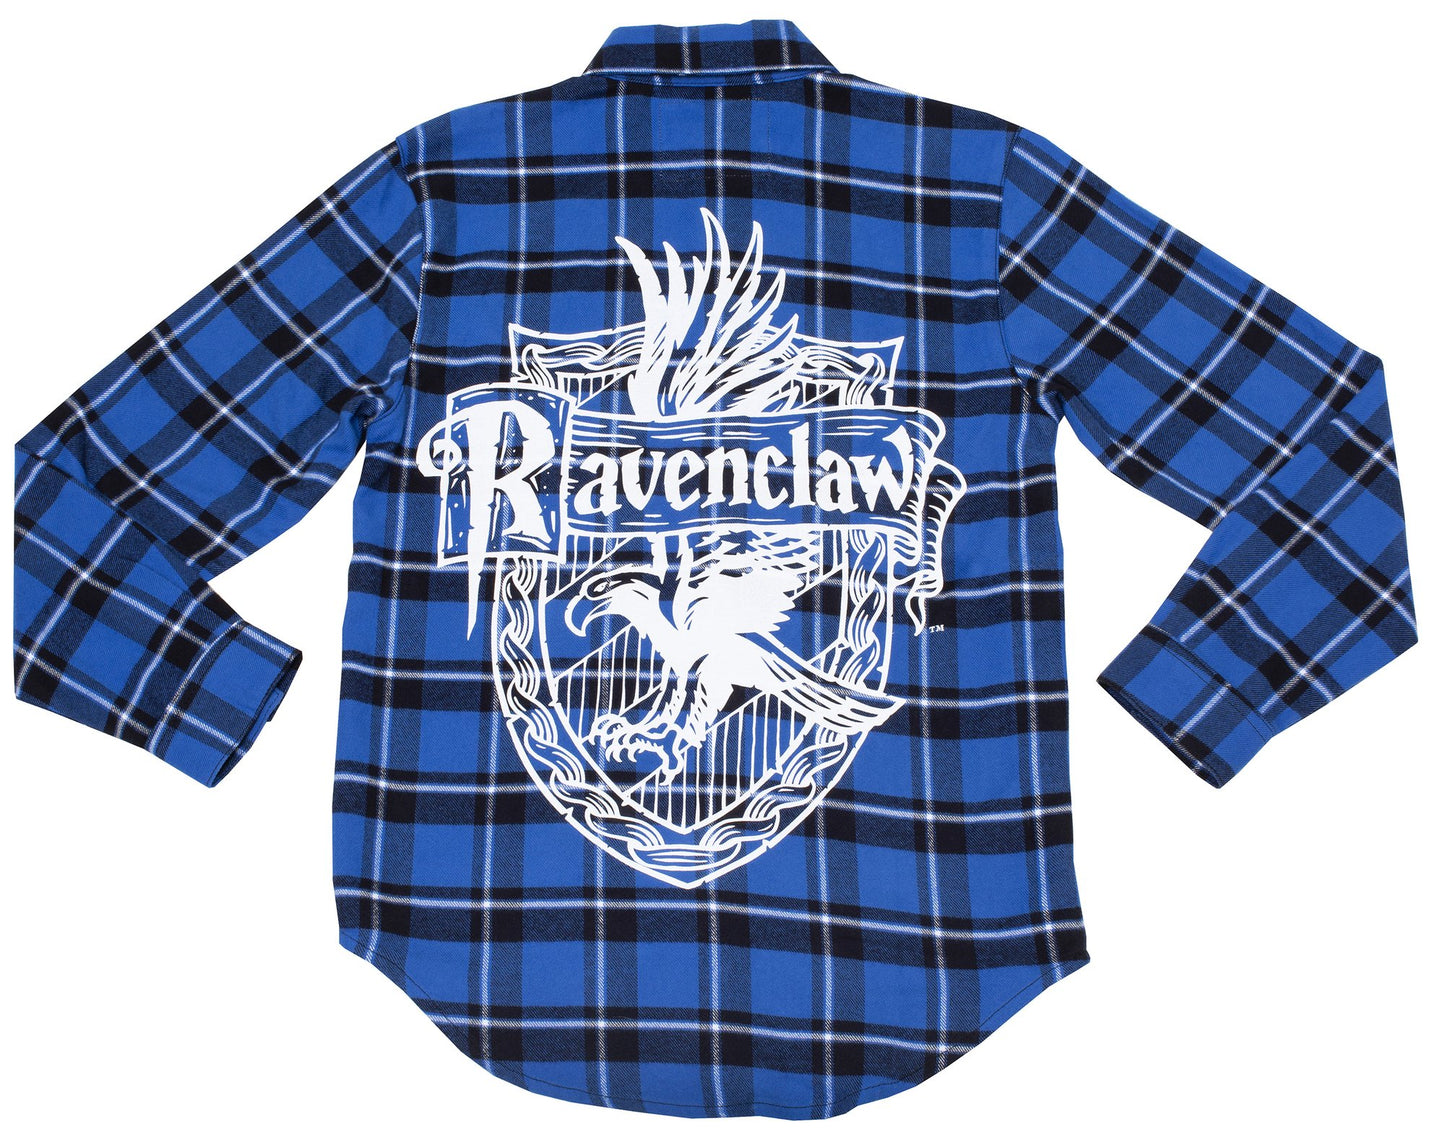 Ravenclaw House Crest (Harry Potter) Flannel Shirt by Cakeworthy